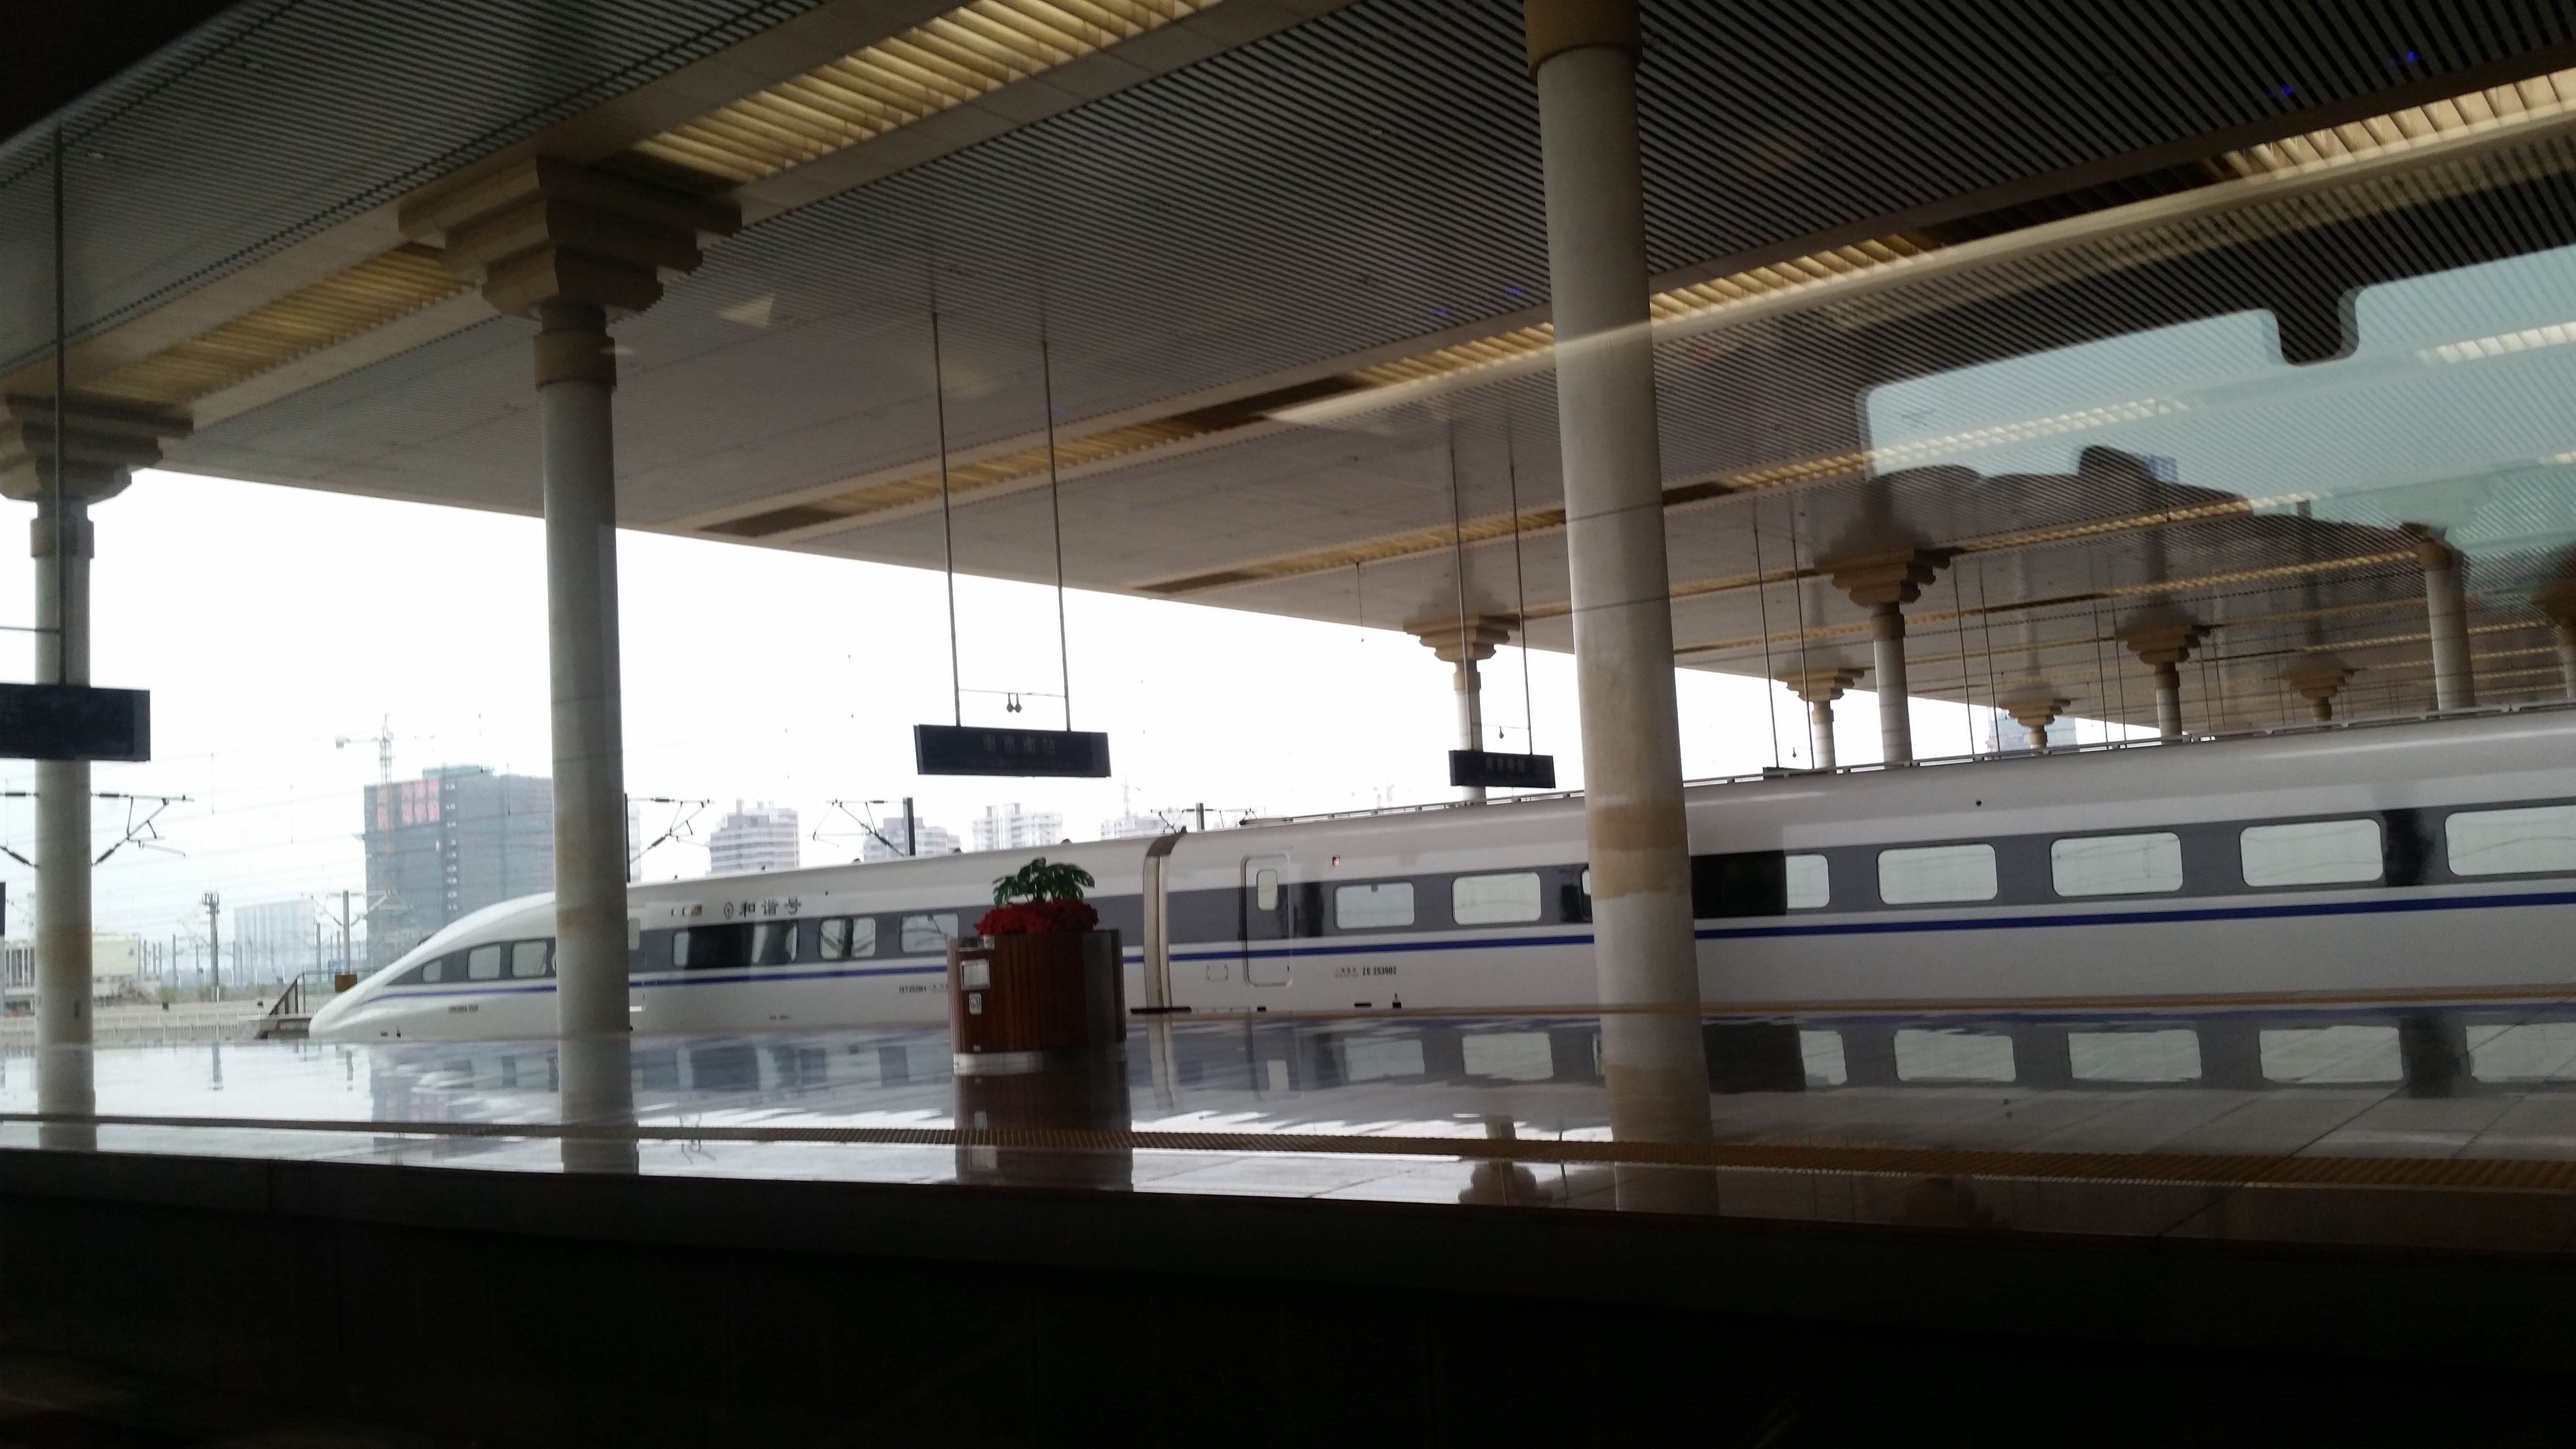 A high speed train at the Beijing South Railway Trainstation.